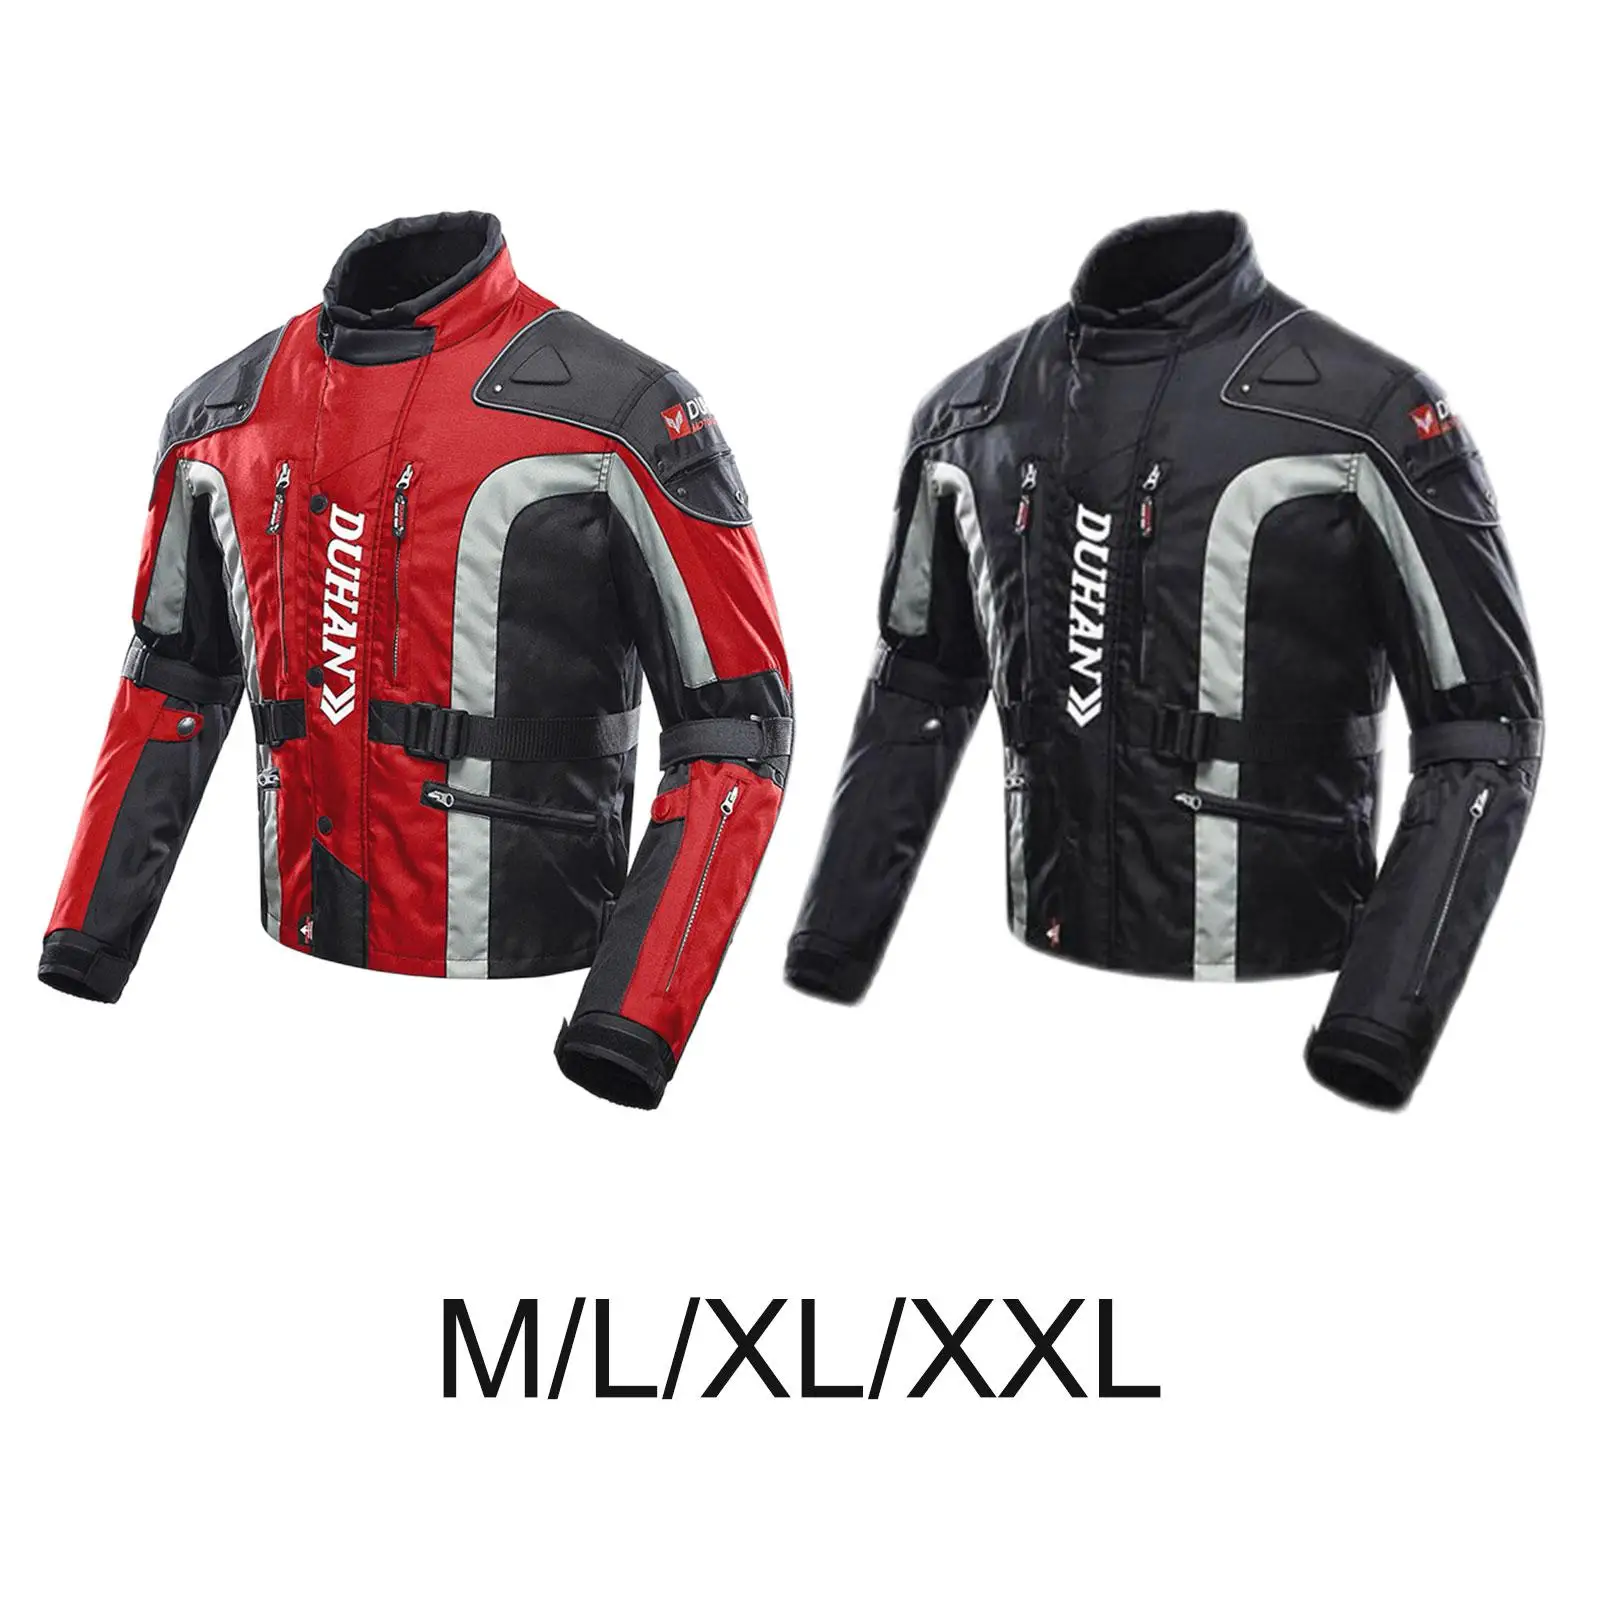 Motorcycle Jacket Autumn Winter Adjustable Full Body Protective Gear Cold-Moto Suit Fit for Bikers Mountain Bike